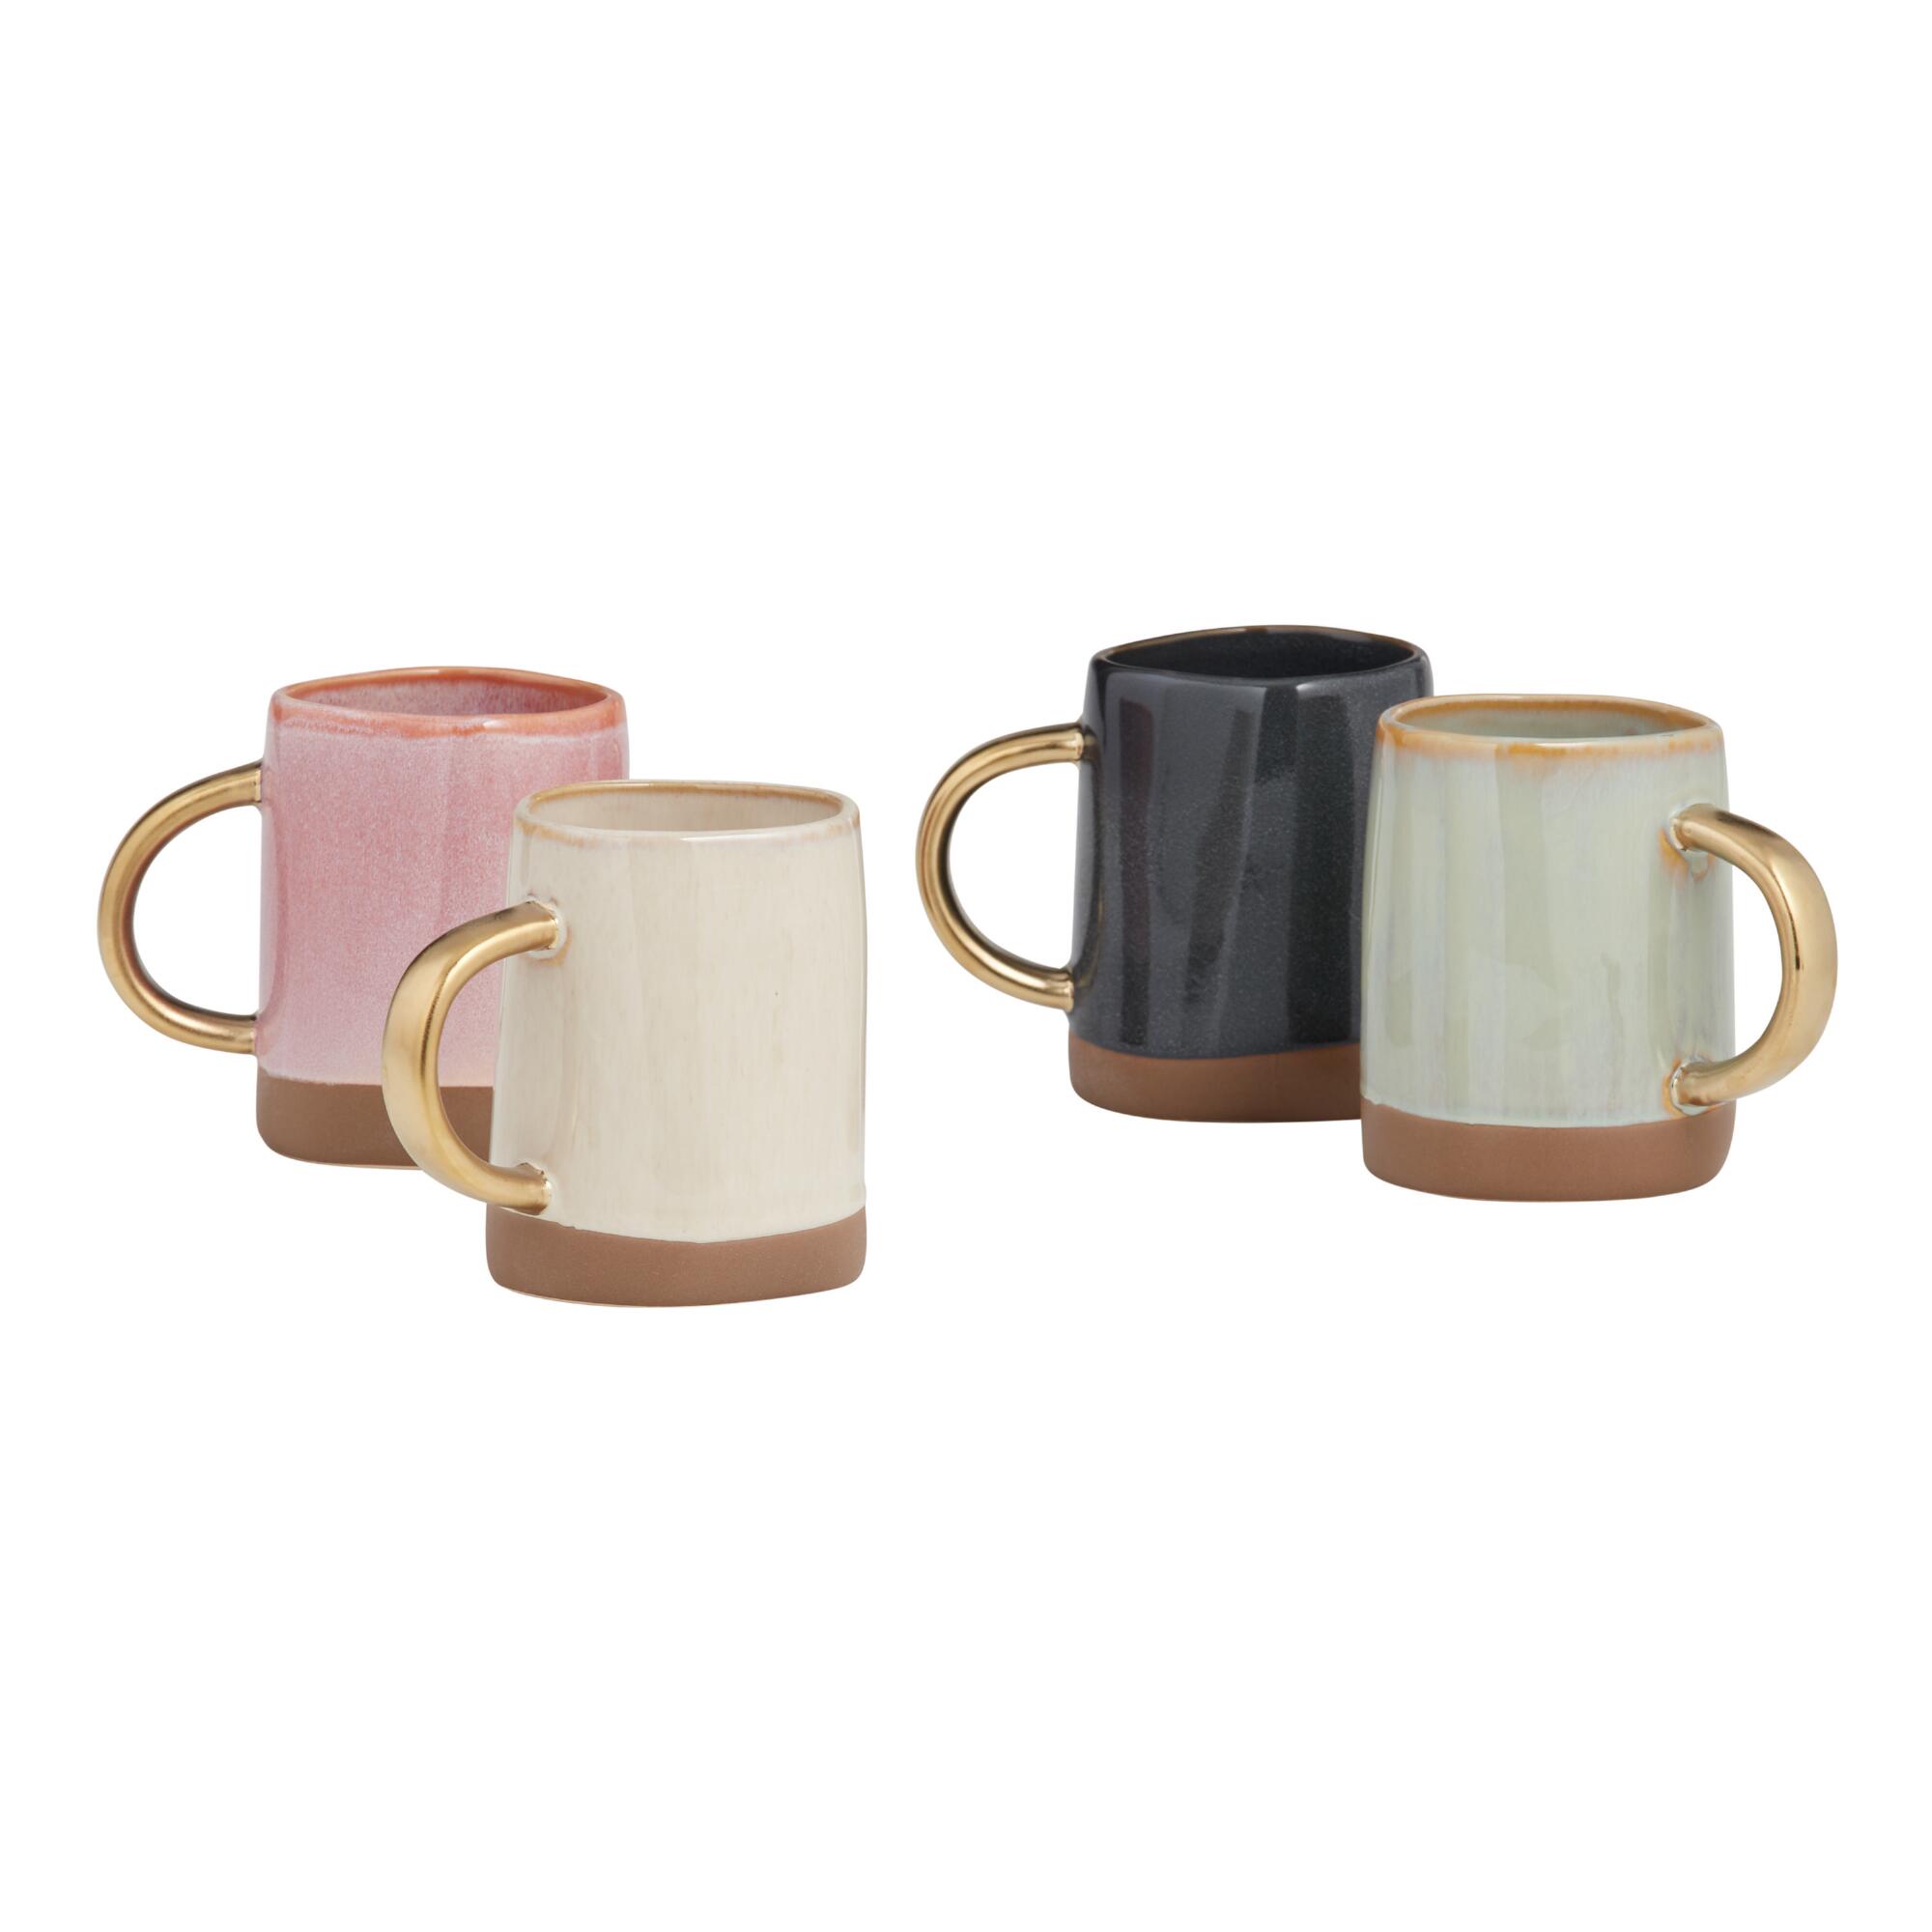 Dipped Reactive Glaze Mugs With Gold Handles Set Of 4 - Stoneware by World Market